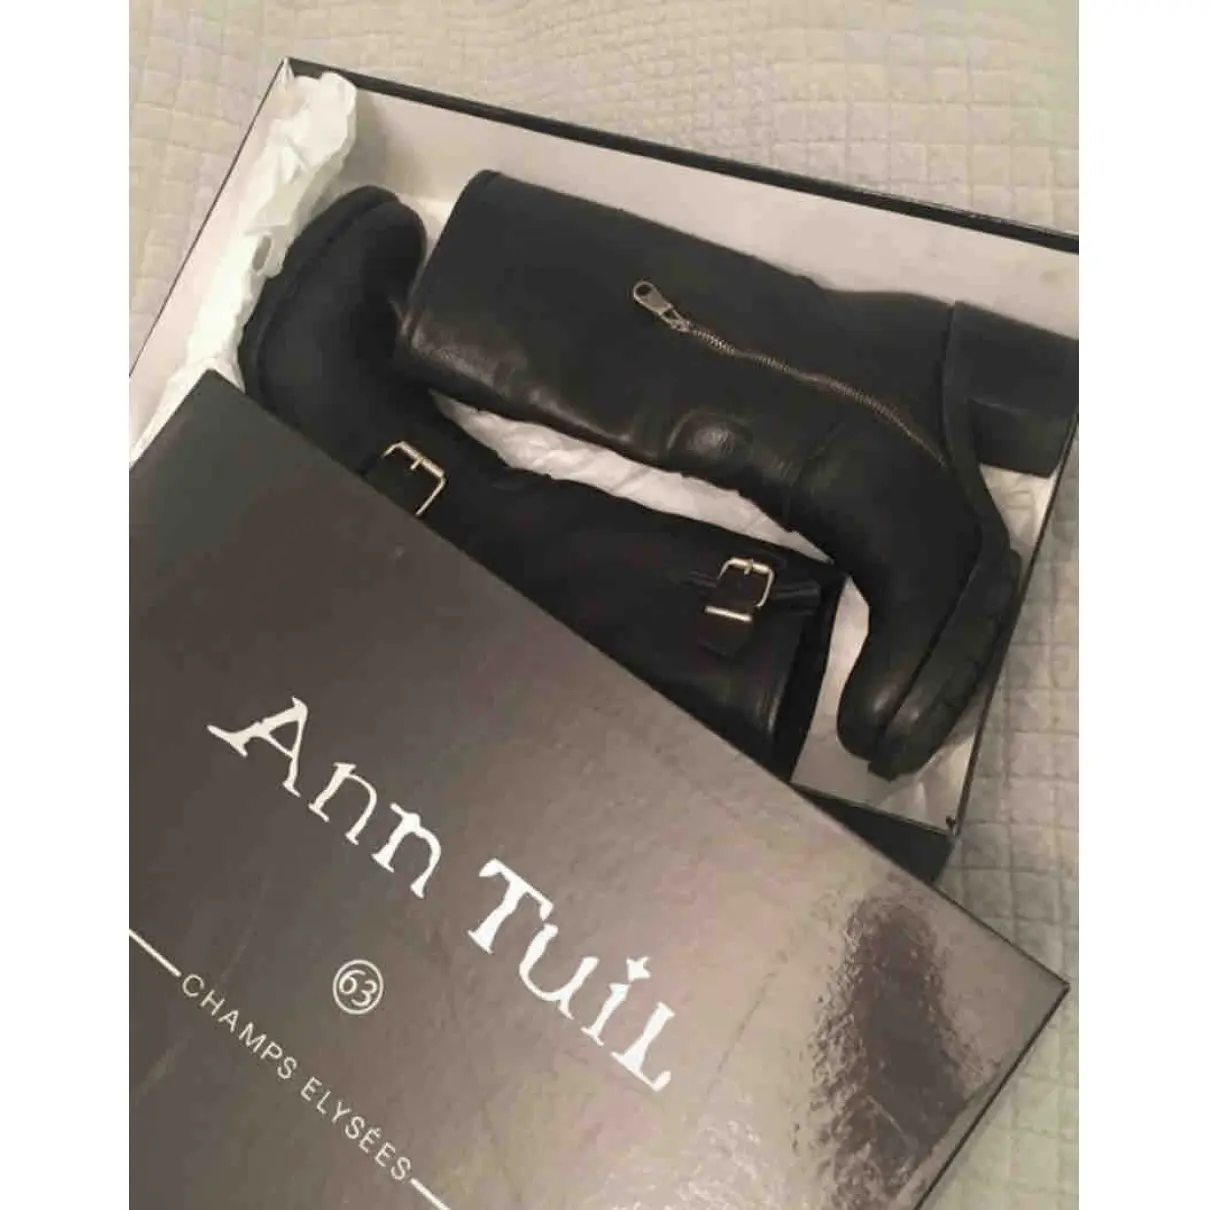 Ann Tuil Leather biker boots for sale